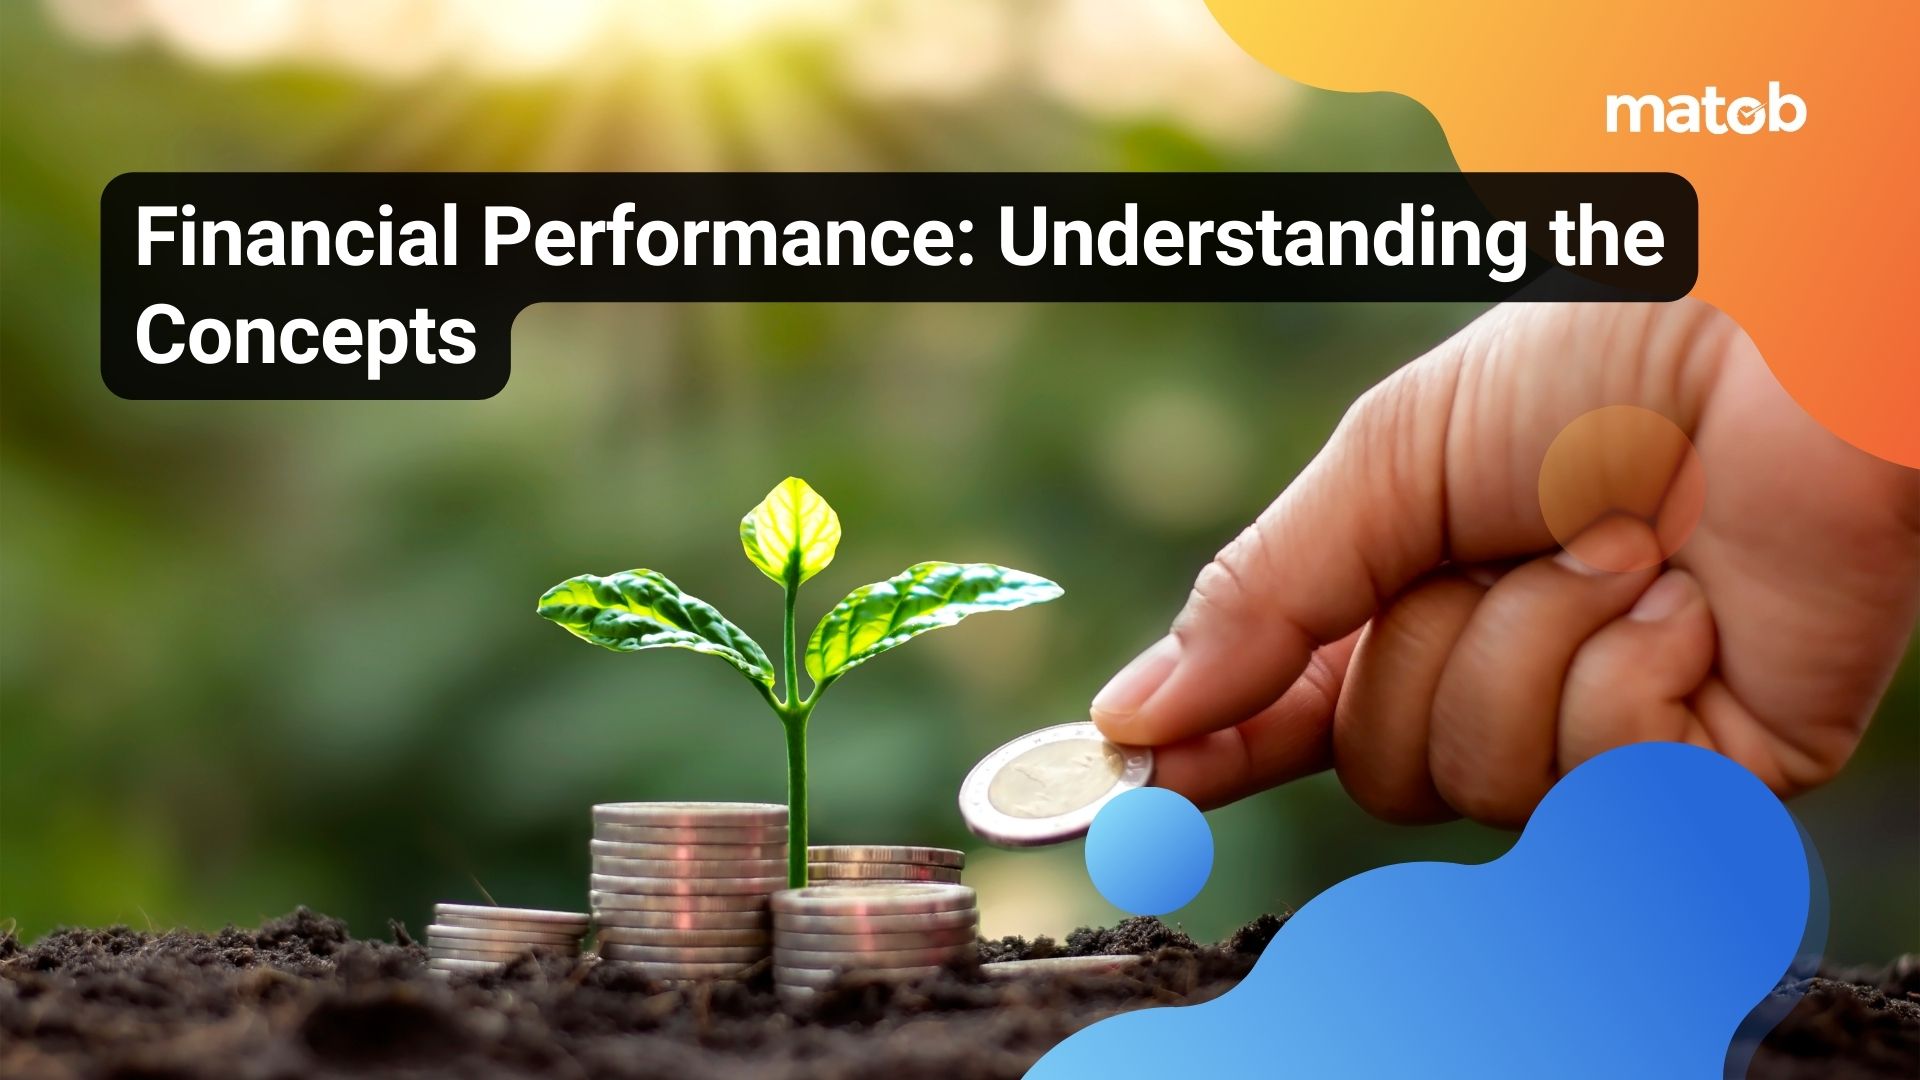 Financial Performance: Understanding the Concepts